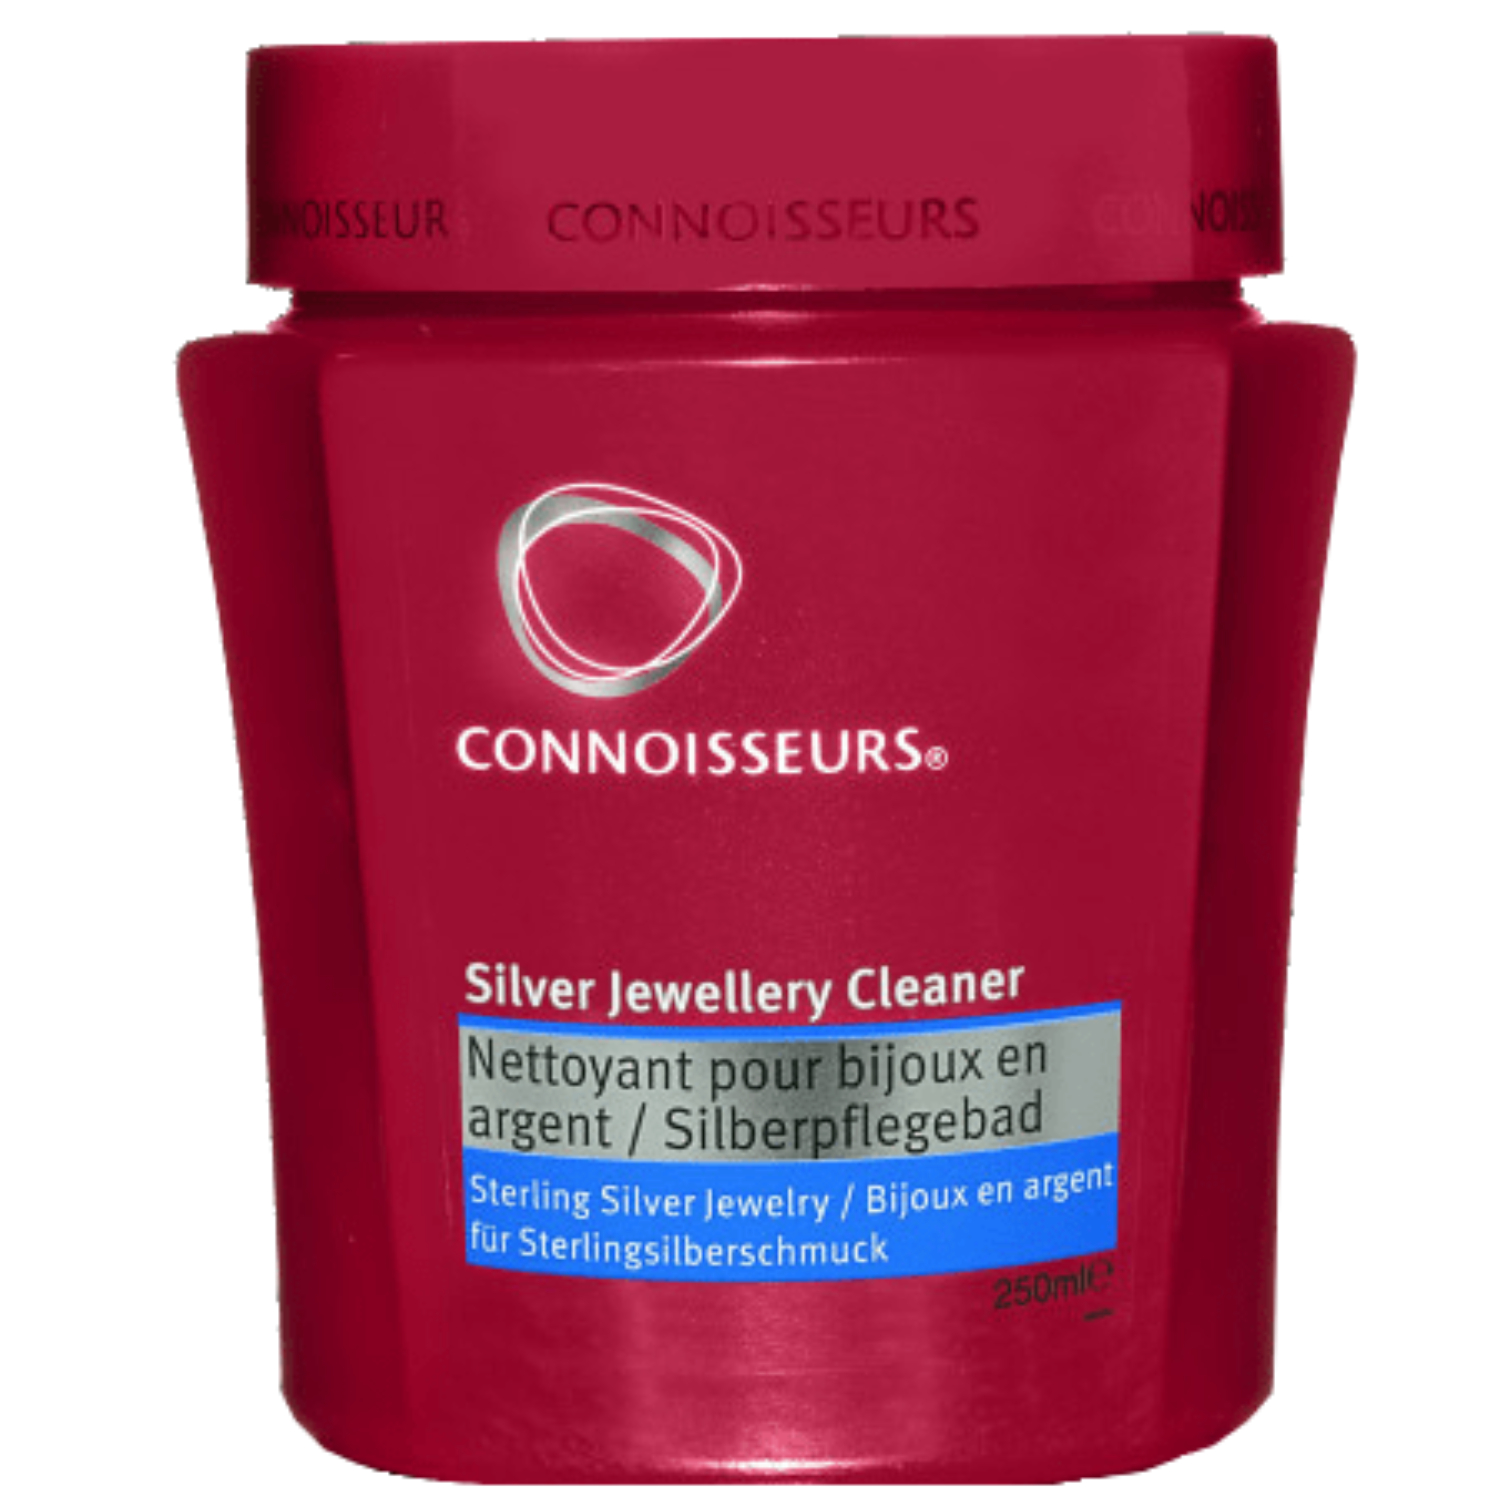 CONNOISSEURS Silver Jewellery Cleaner, 250ml